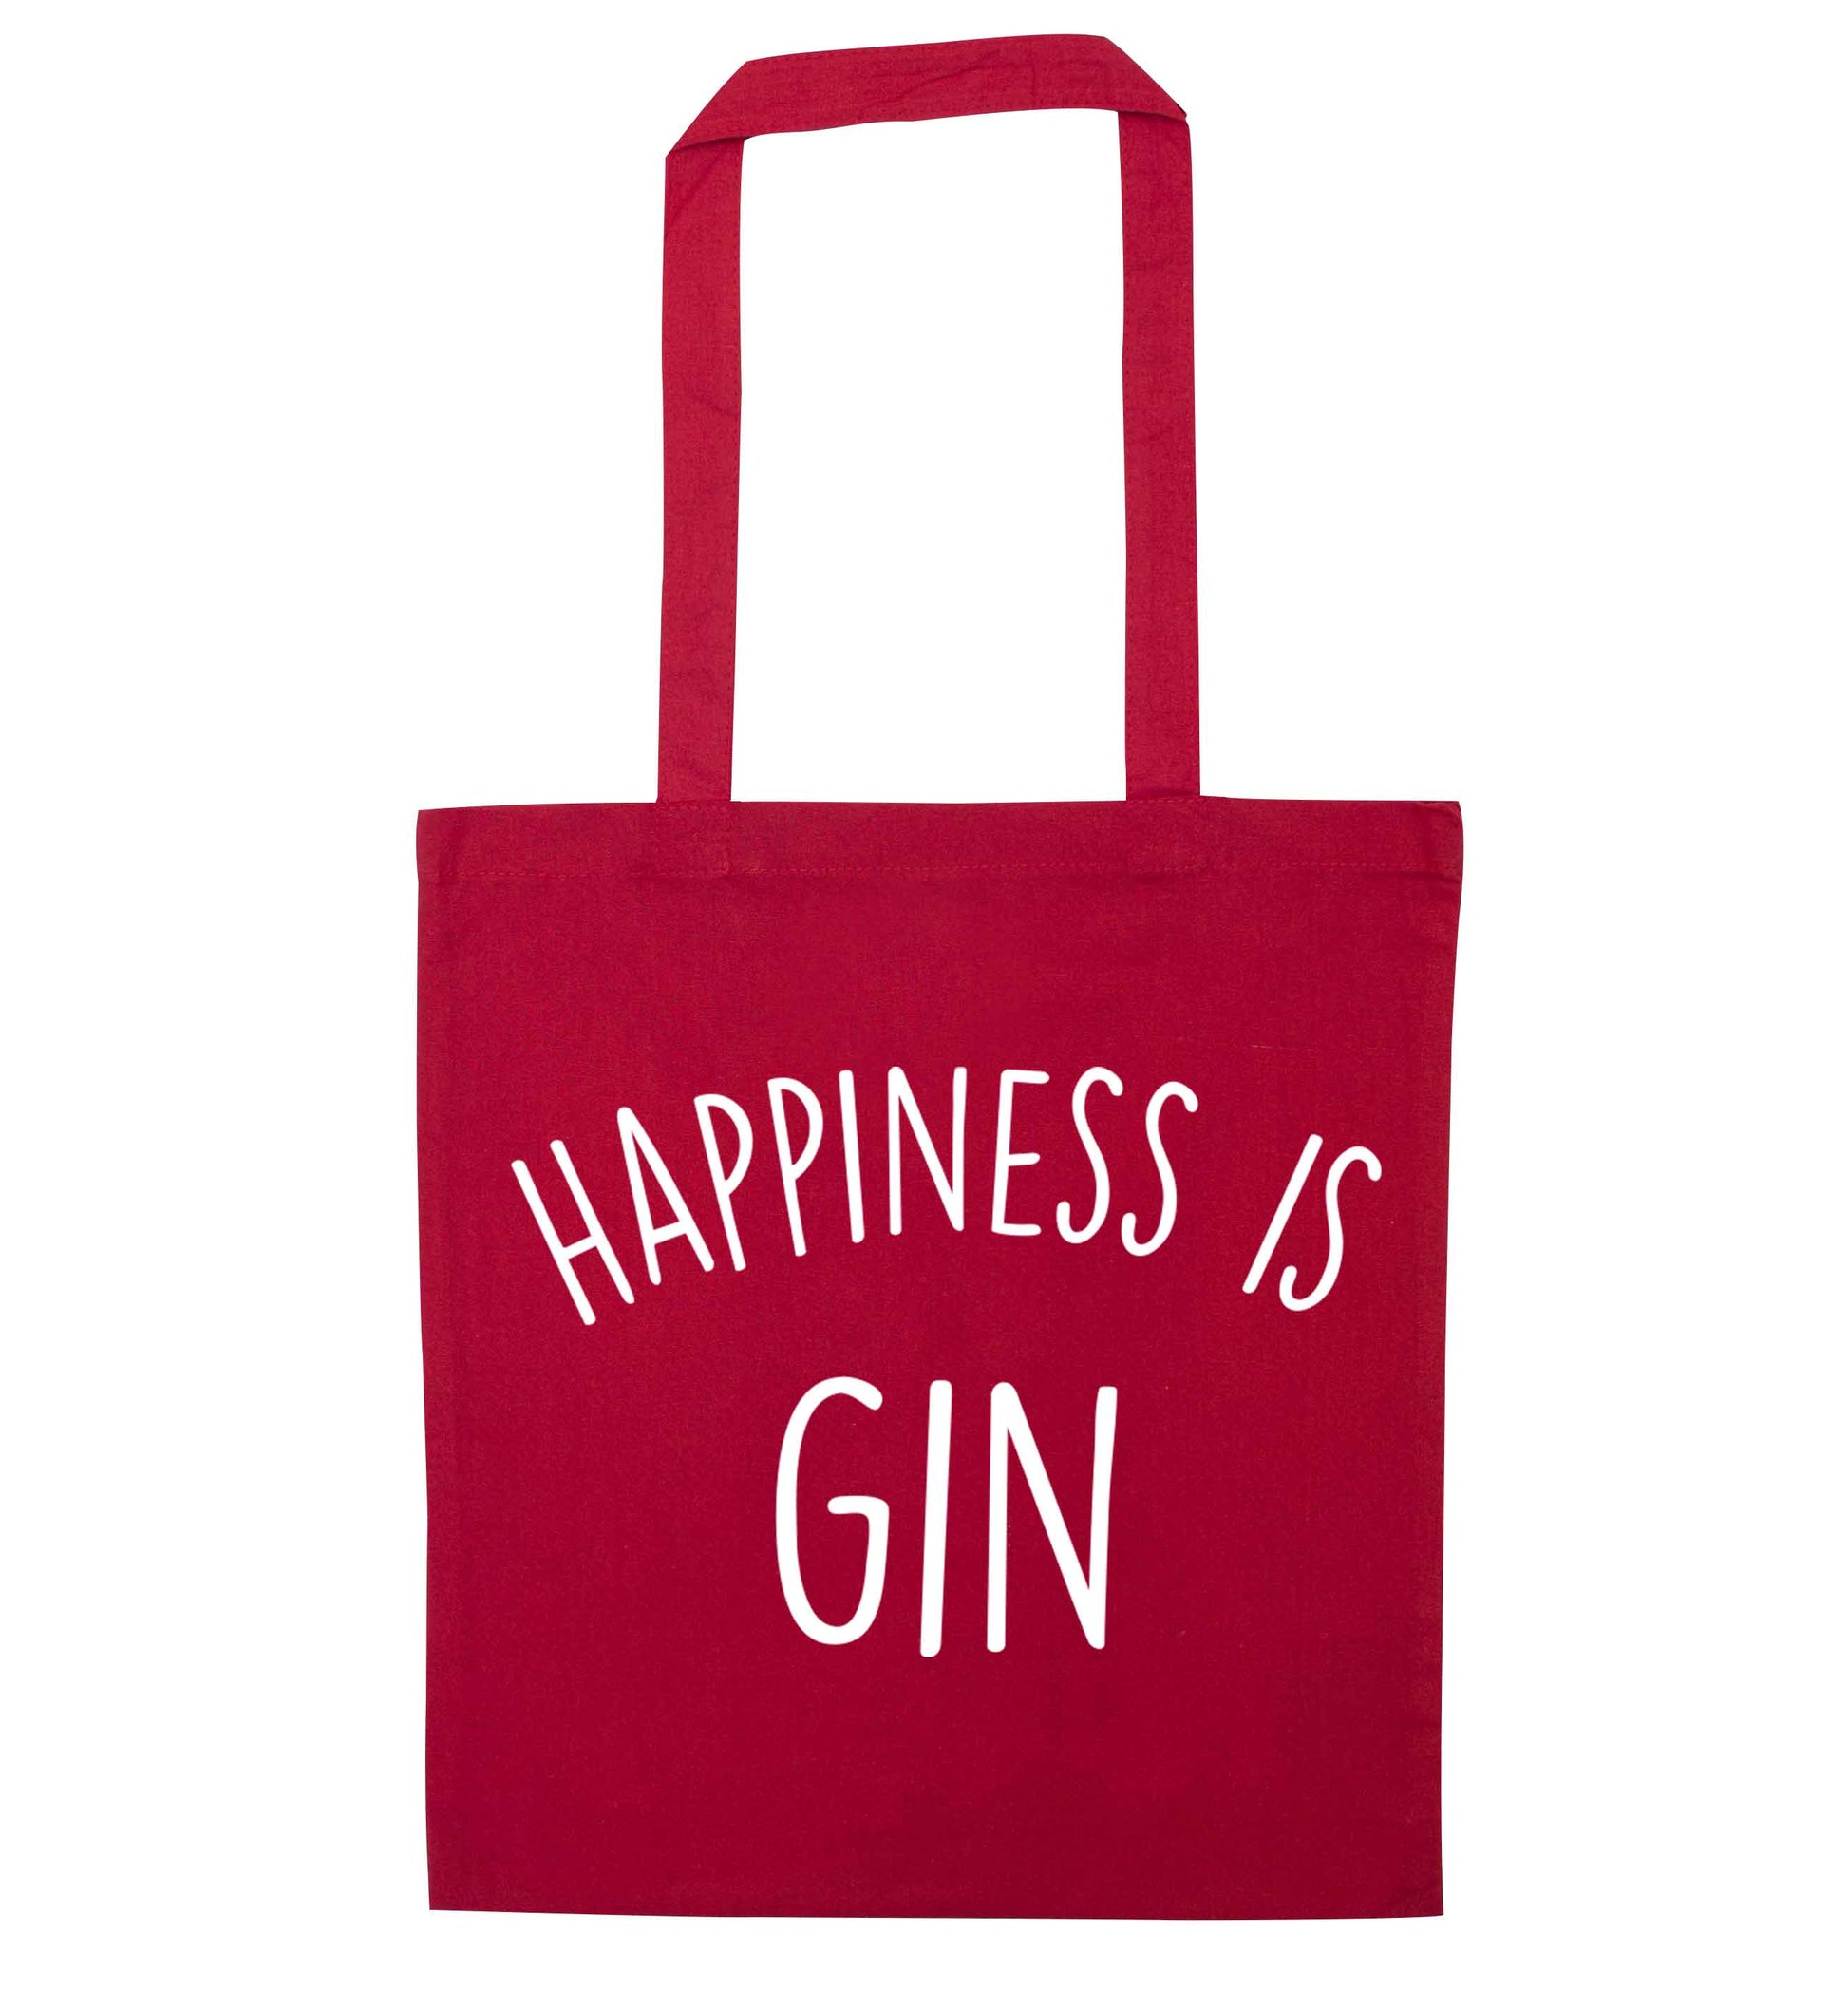 Happiness is gin red tote bag